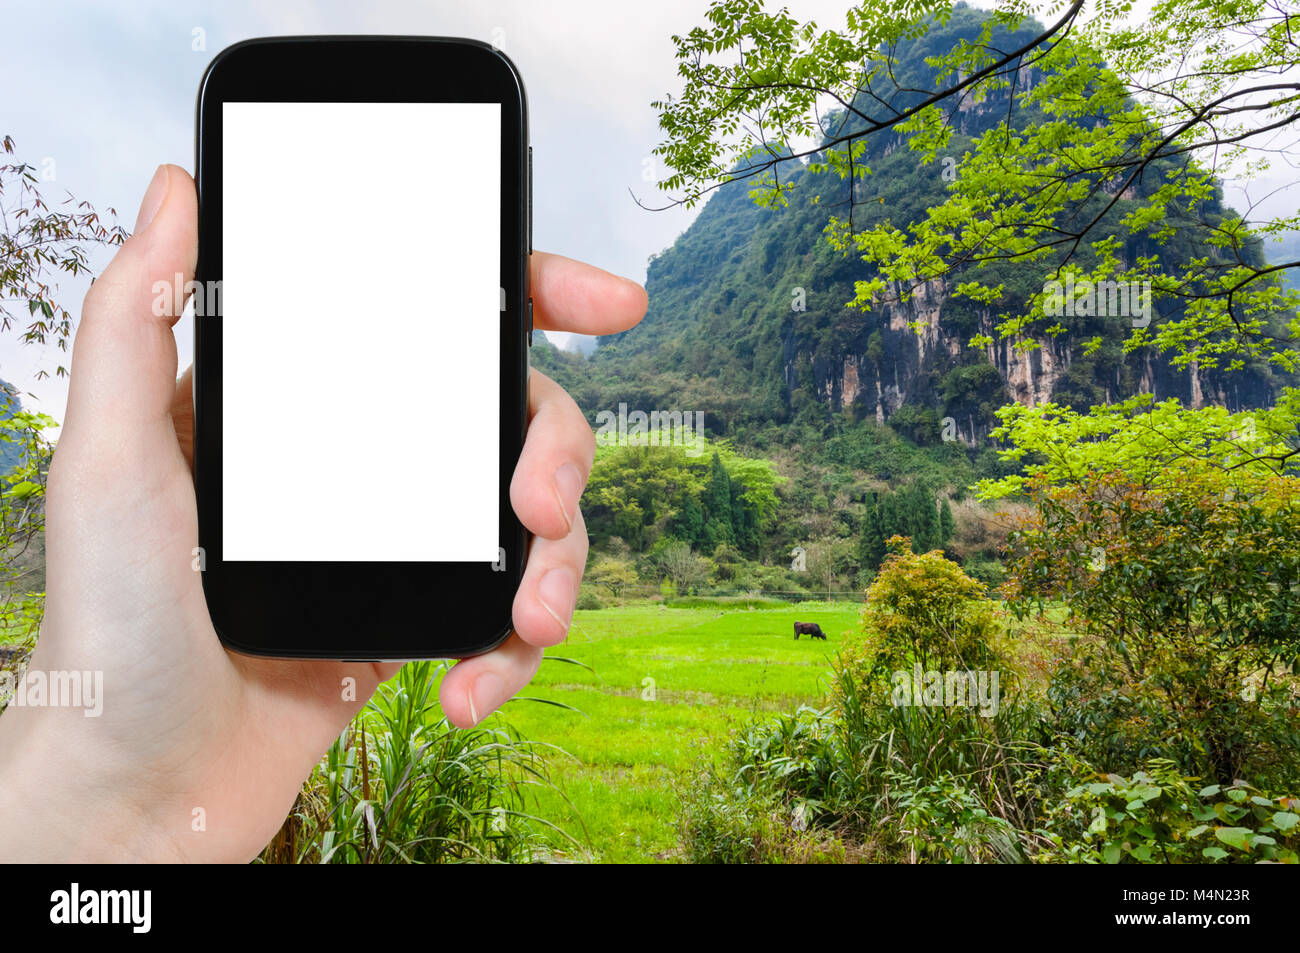 travel concept - tourist photographs green meadow near karst mountain in Yangshuo County in China in spring season on smartphone with cut out screen f Stock Photo